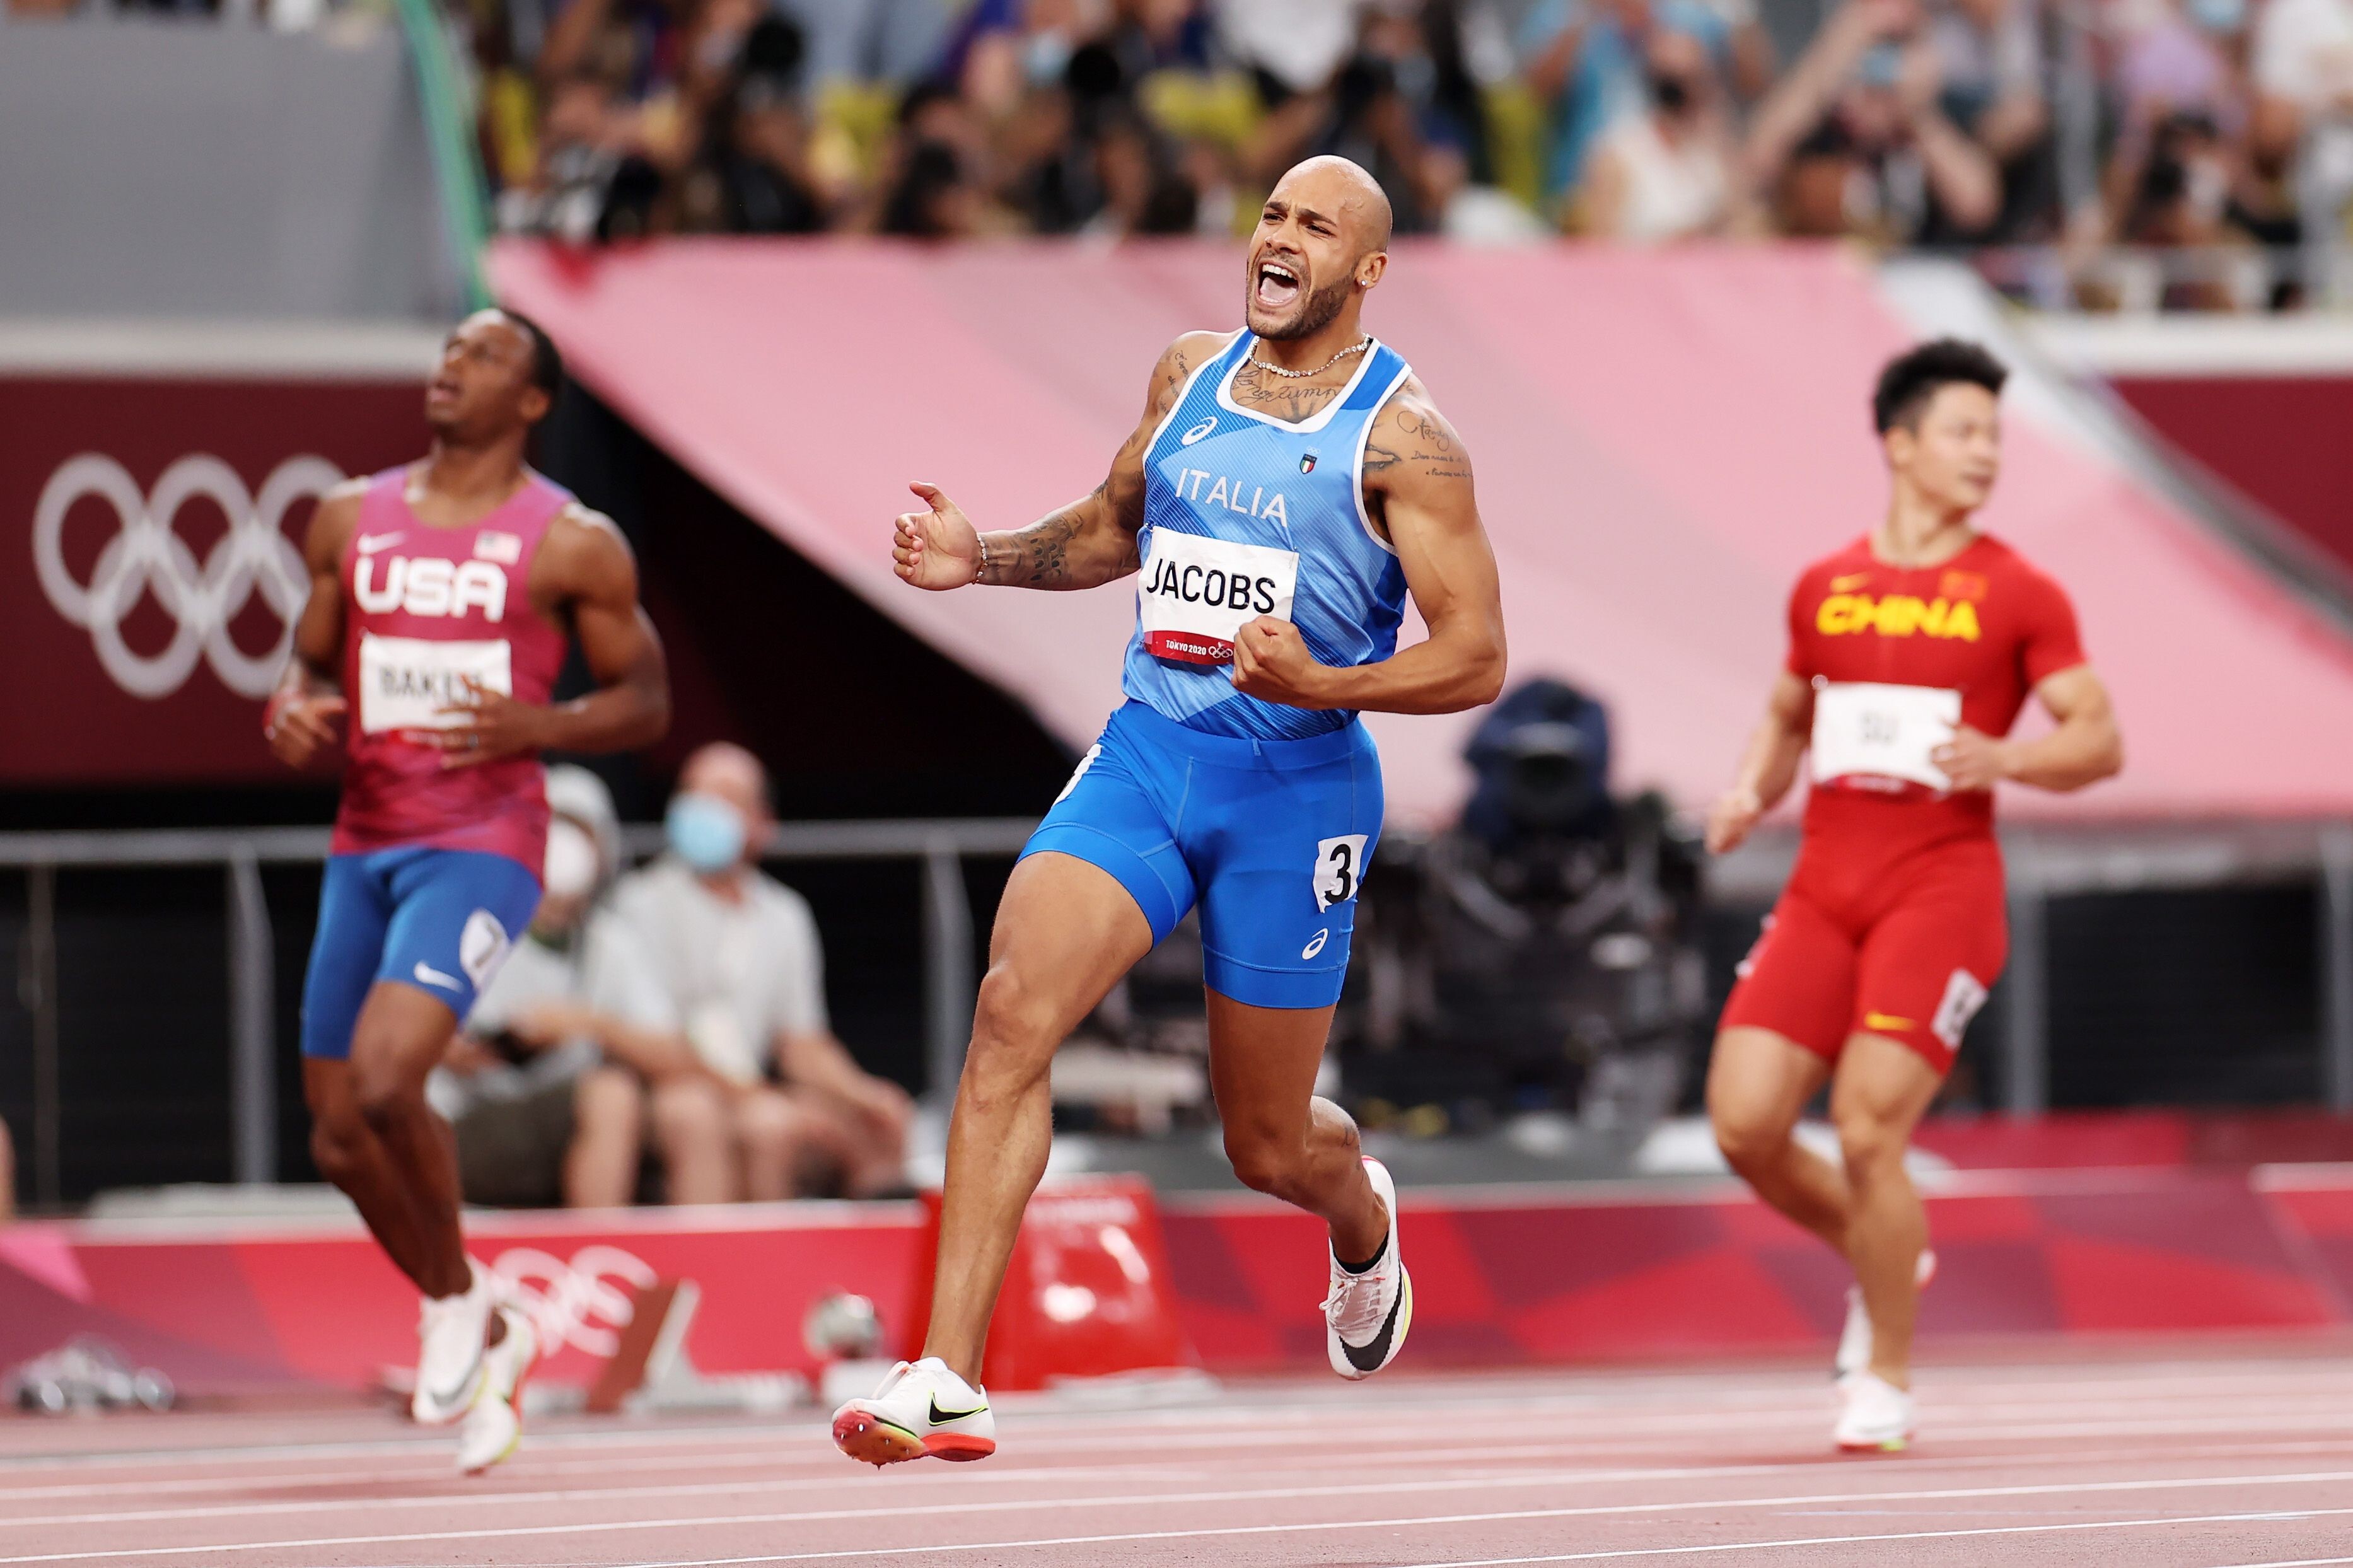 Olympic 100m champion Marcell Jacobs will compete at the World Athletics Indoor Tour Gold meeting in Lievin